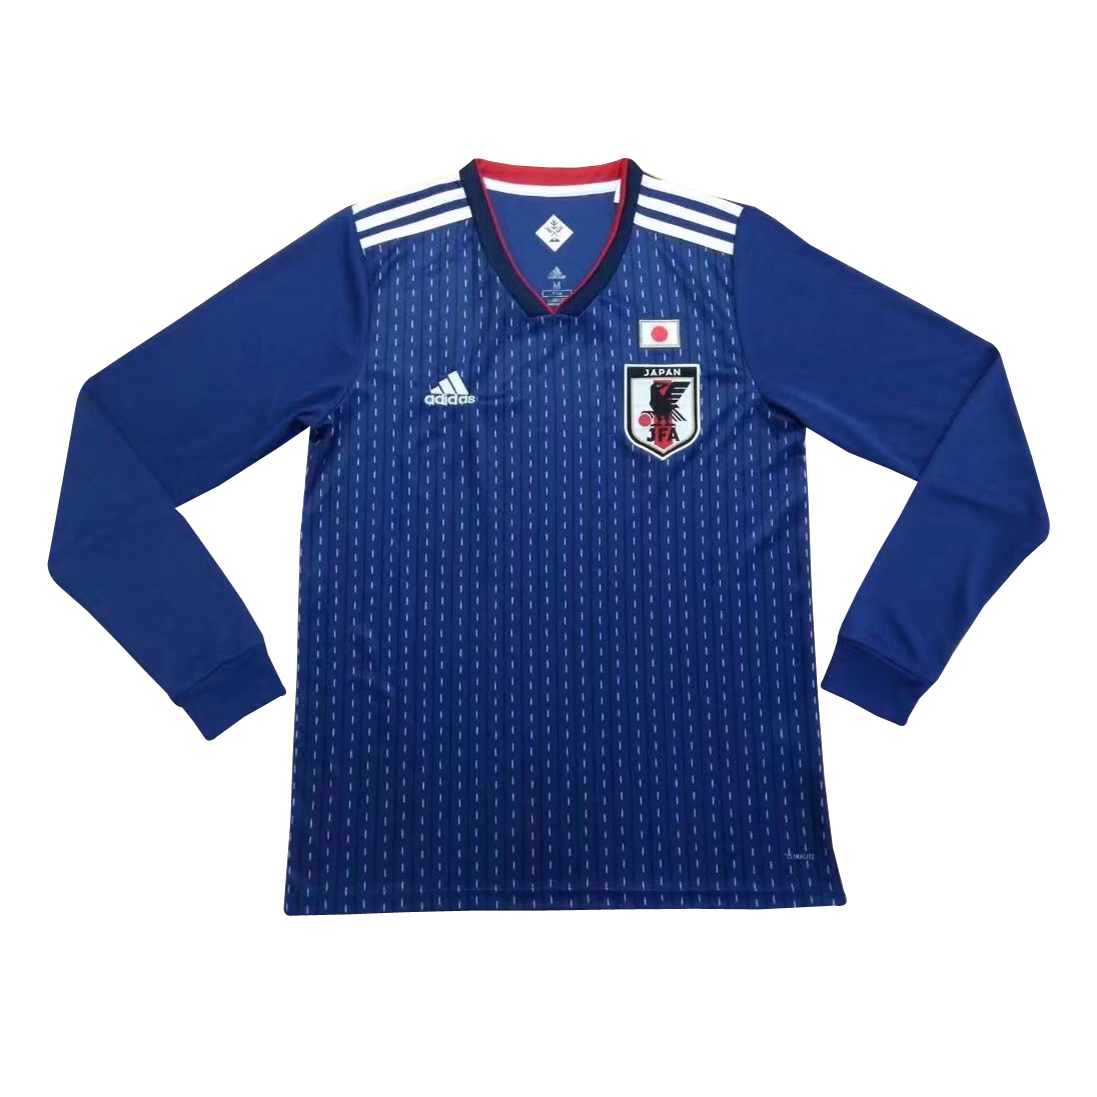 japan 2018 world cup jersey